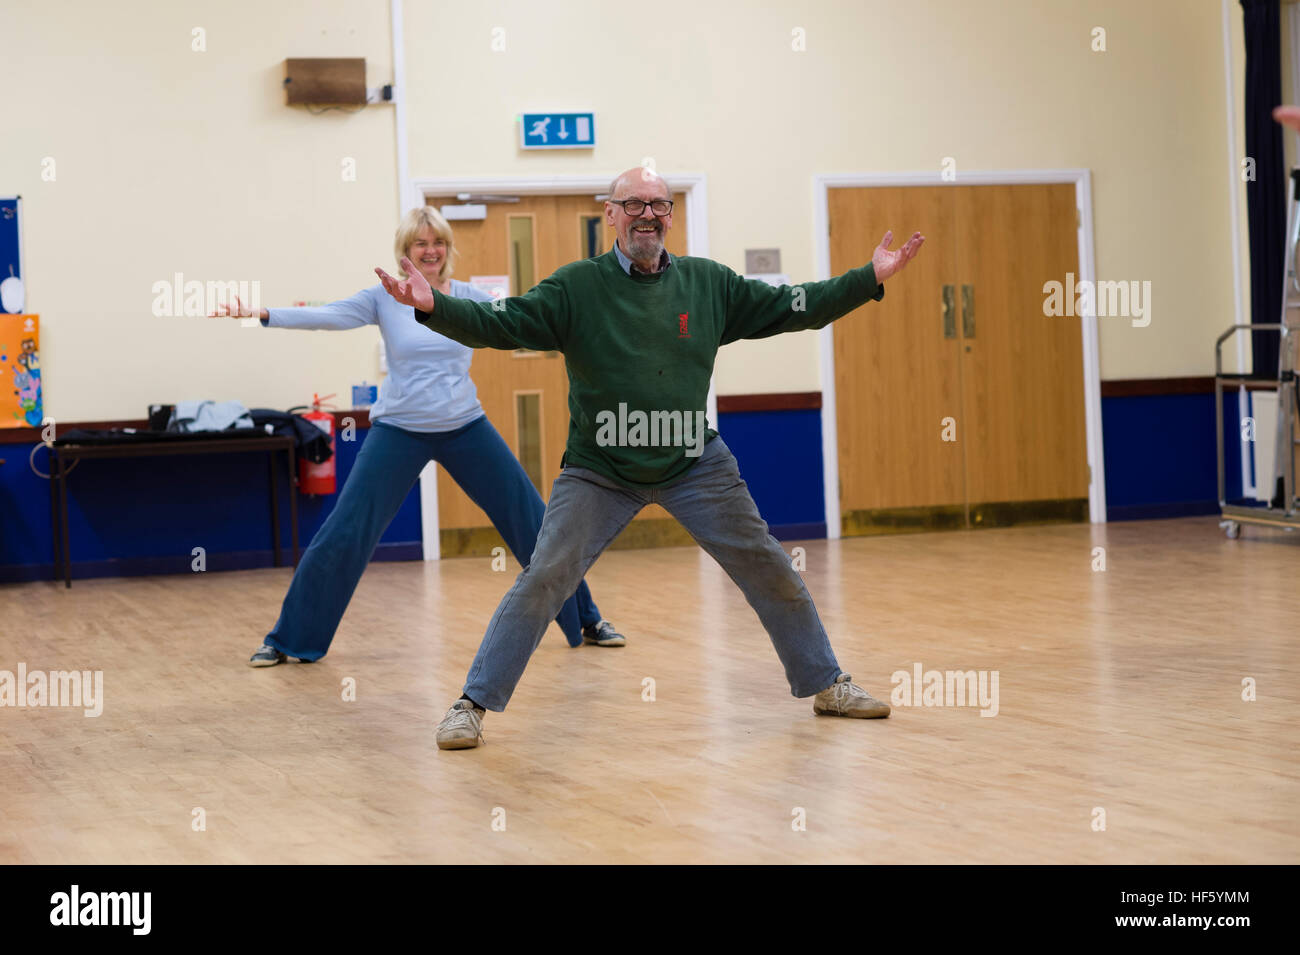 Two Middle aged people - man and woman,  taking part in a Tai Chi exercise workshop lesson class at Tregaron Memorial Hall , rural Ceredigion, Wales UK Stock Photo